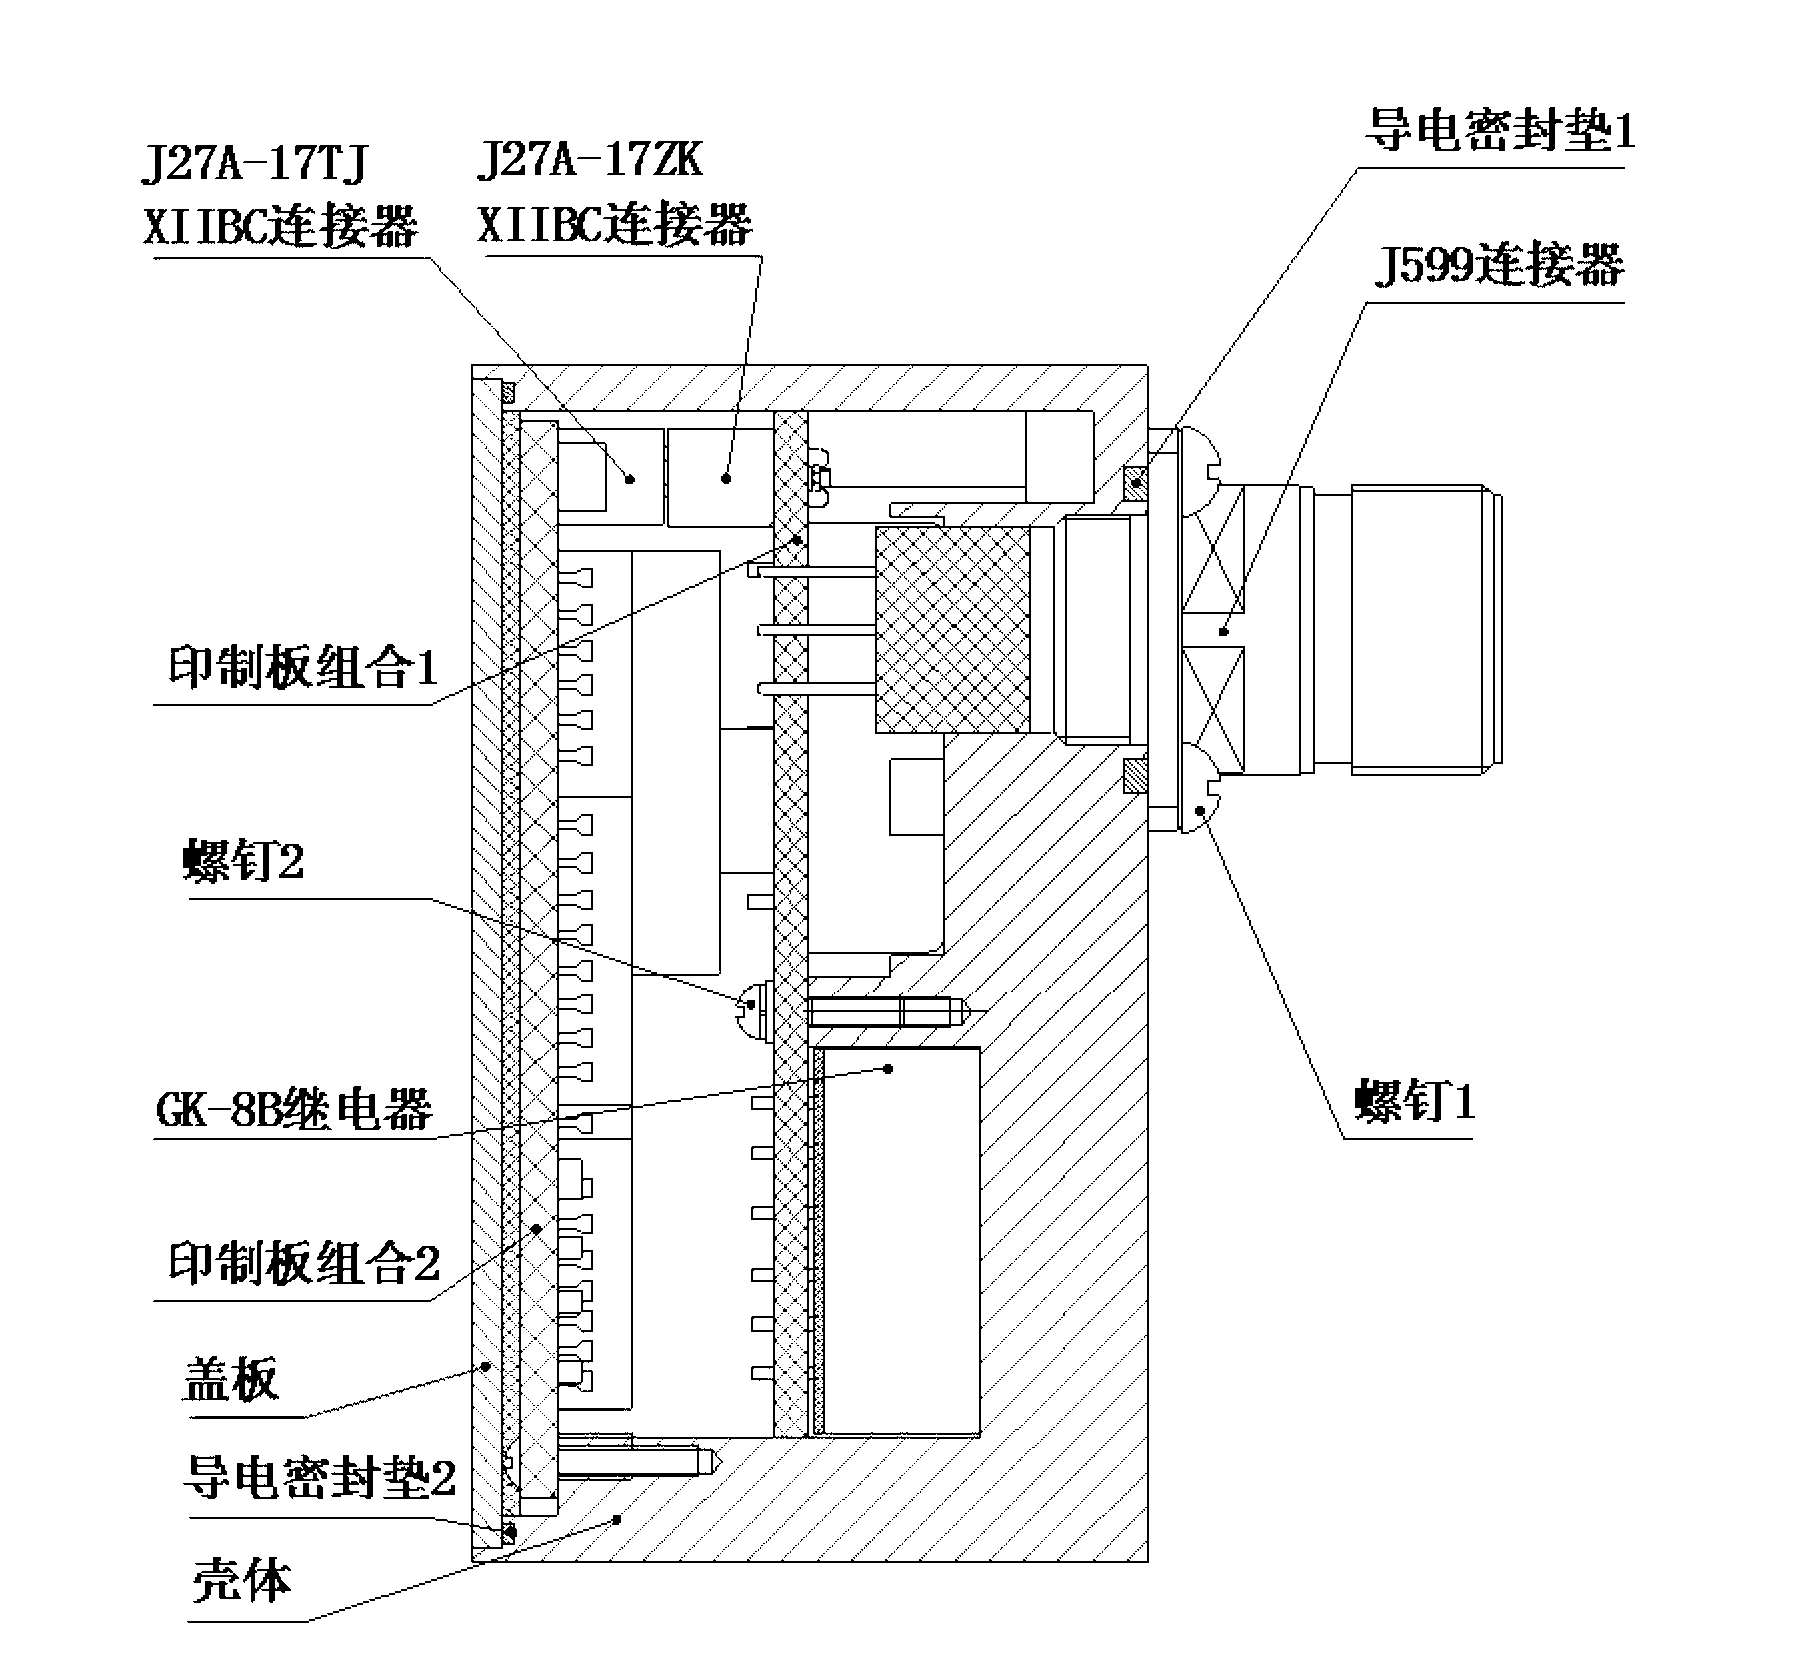 Overload relay based on wireless connection